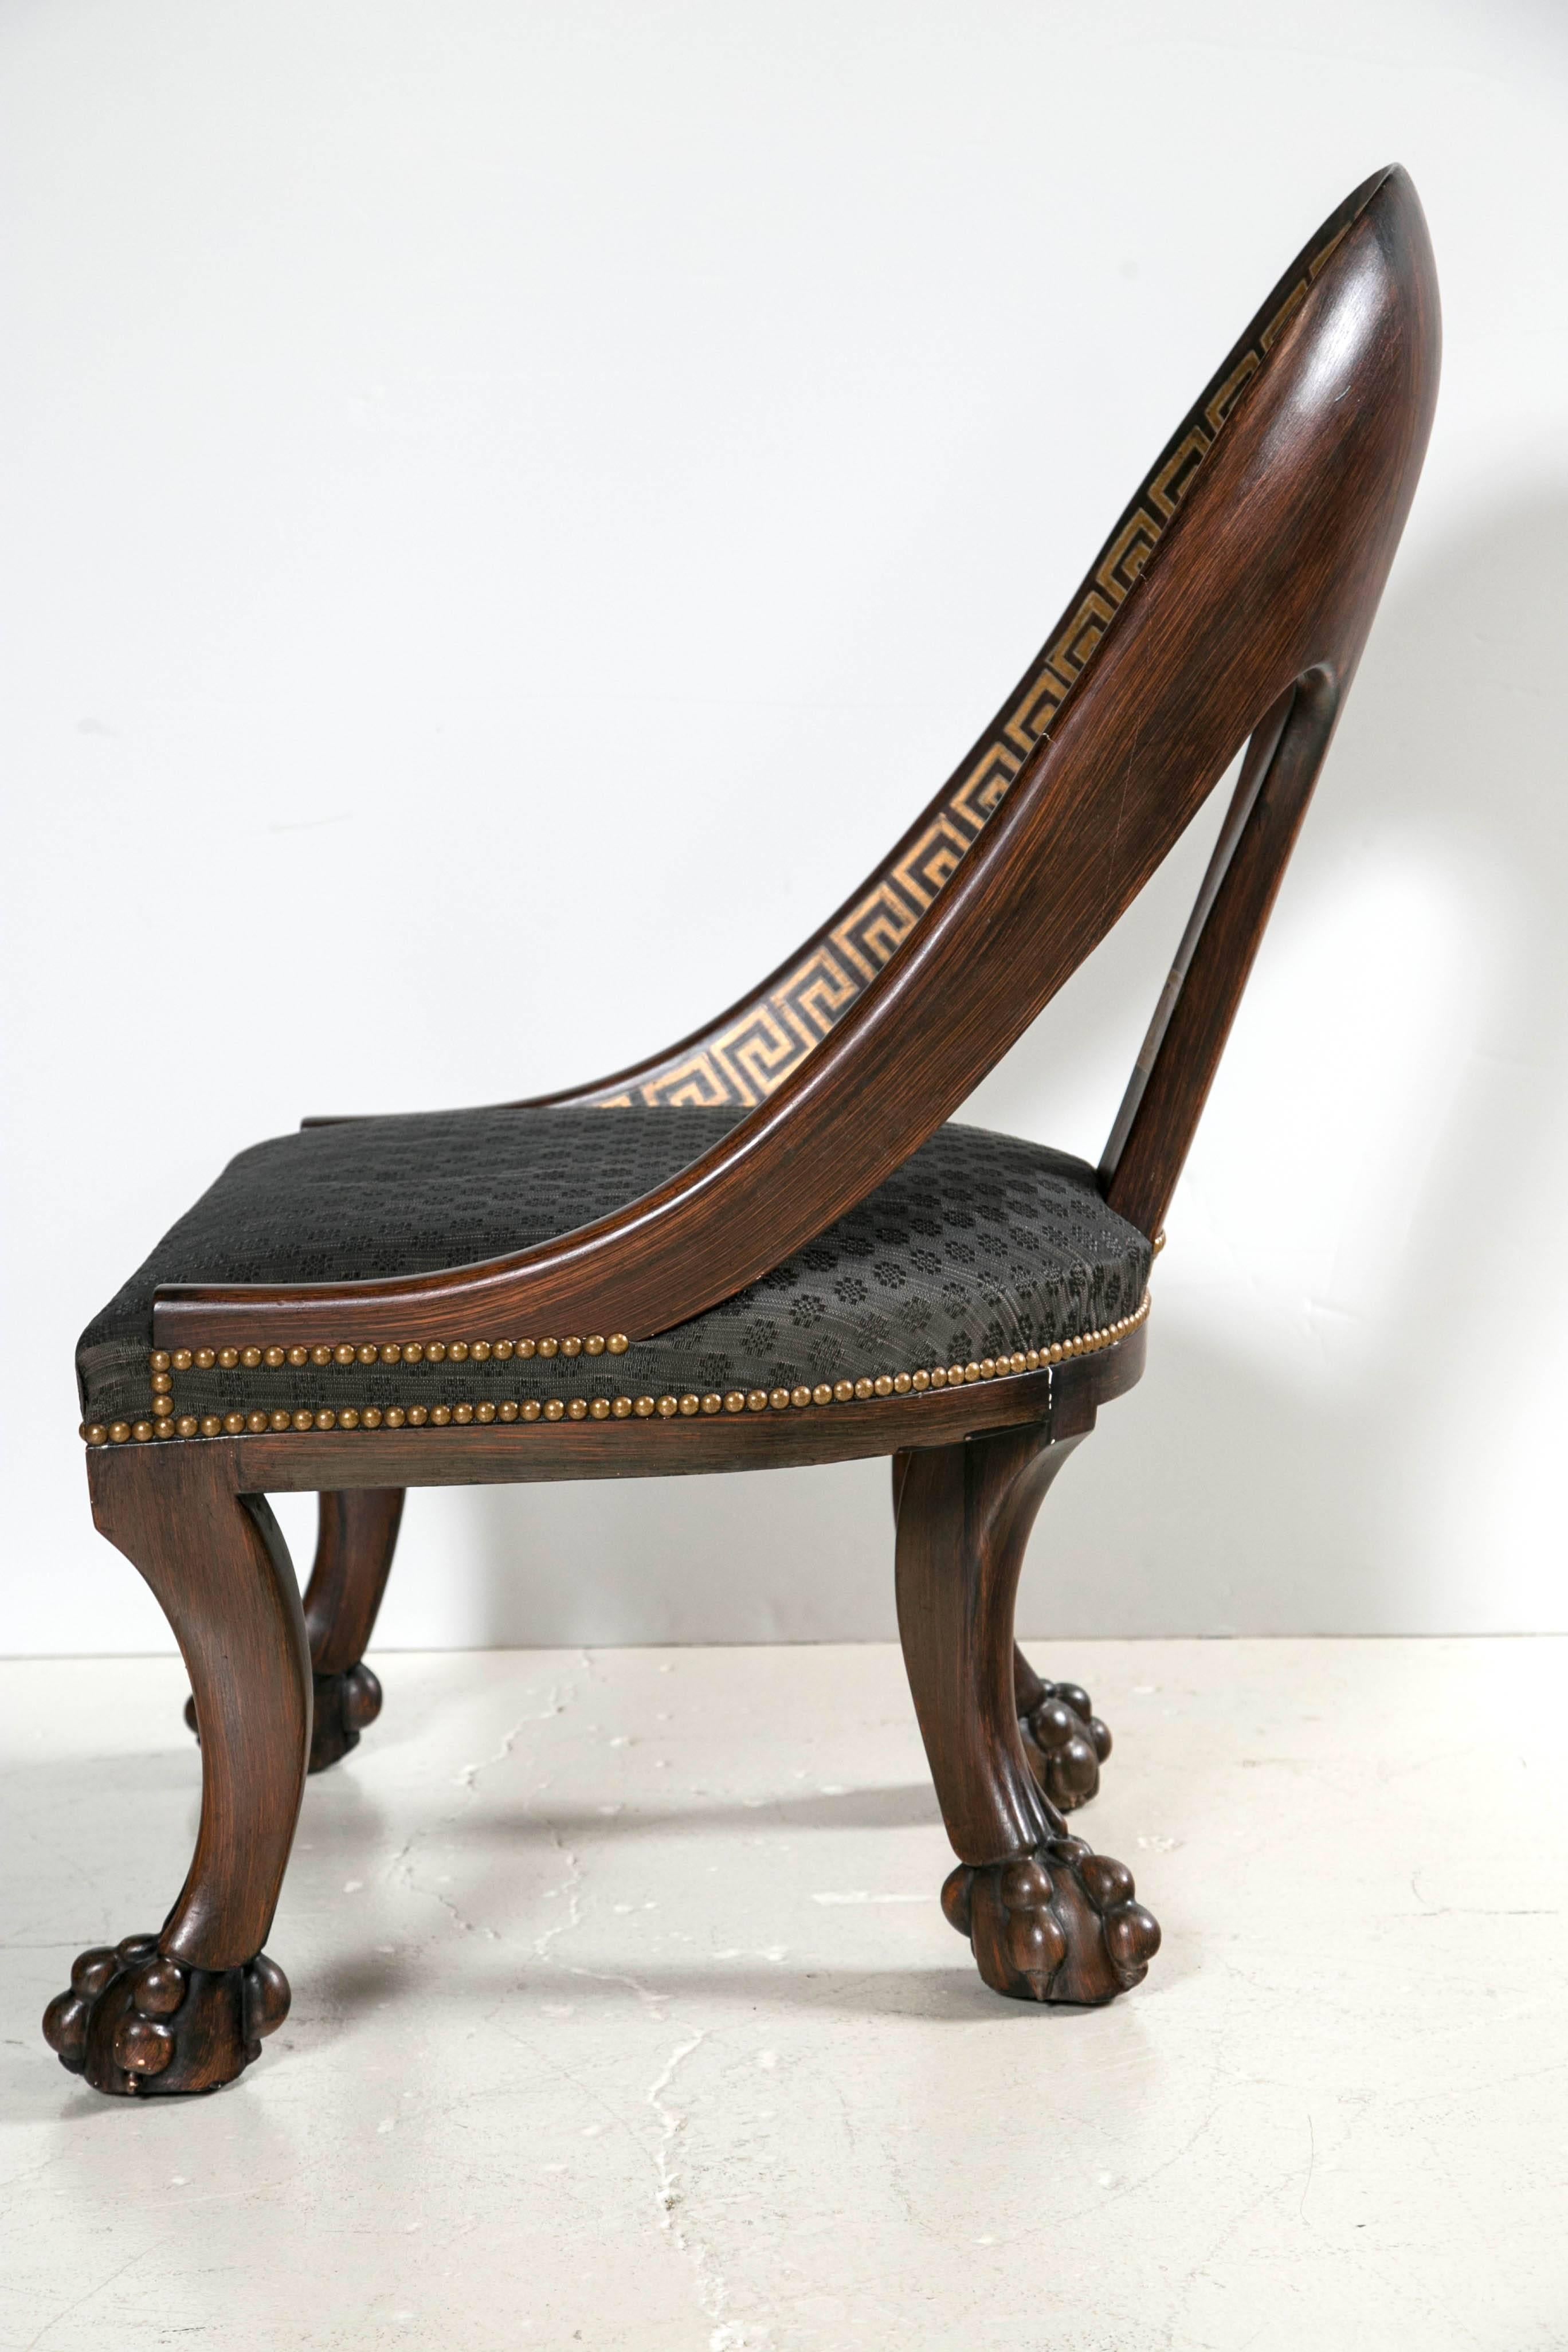 English Spoon-Back Chairs